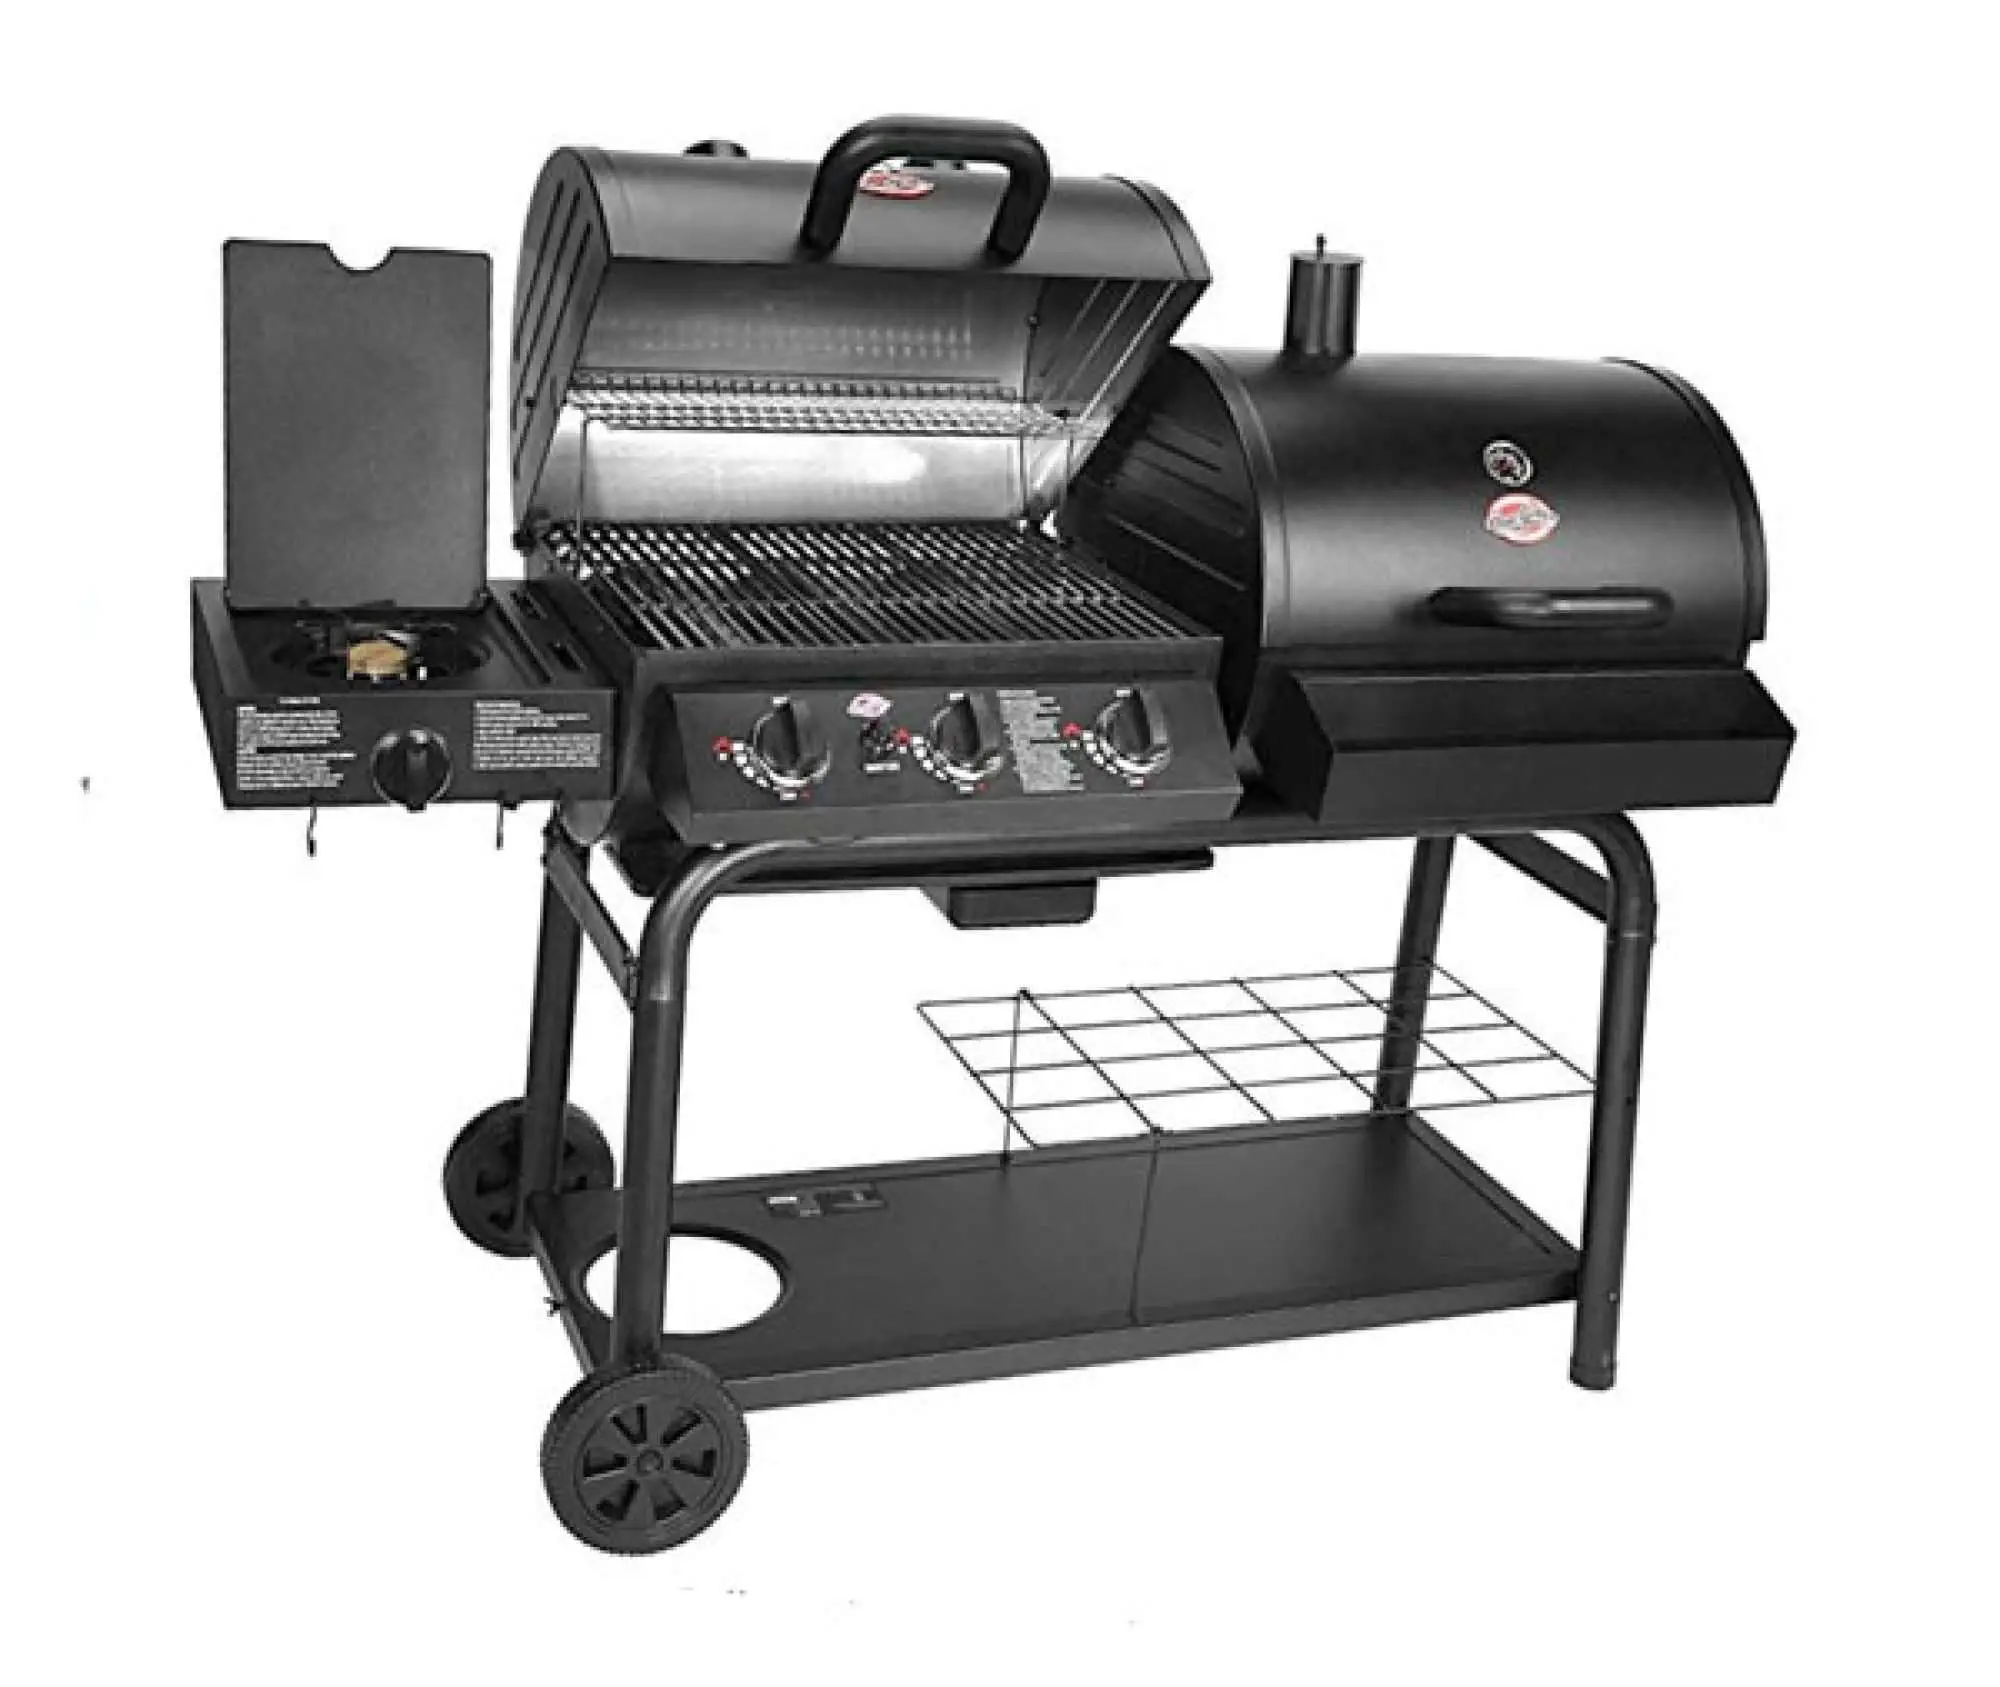 TOP 10 Best Gas Charcoal Combo Grills 2020